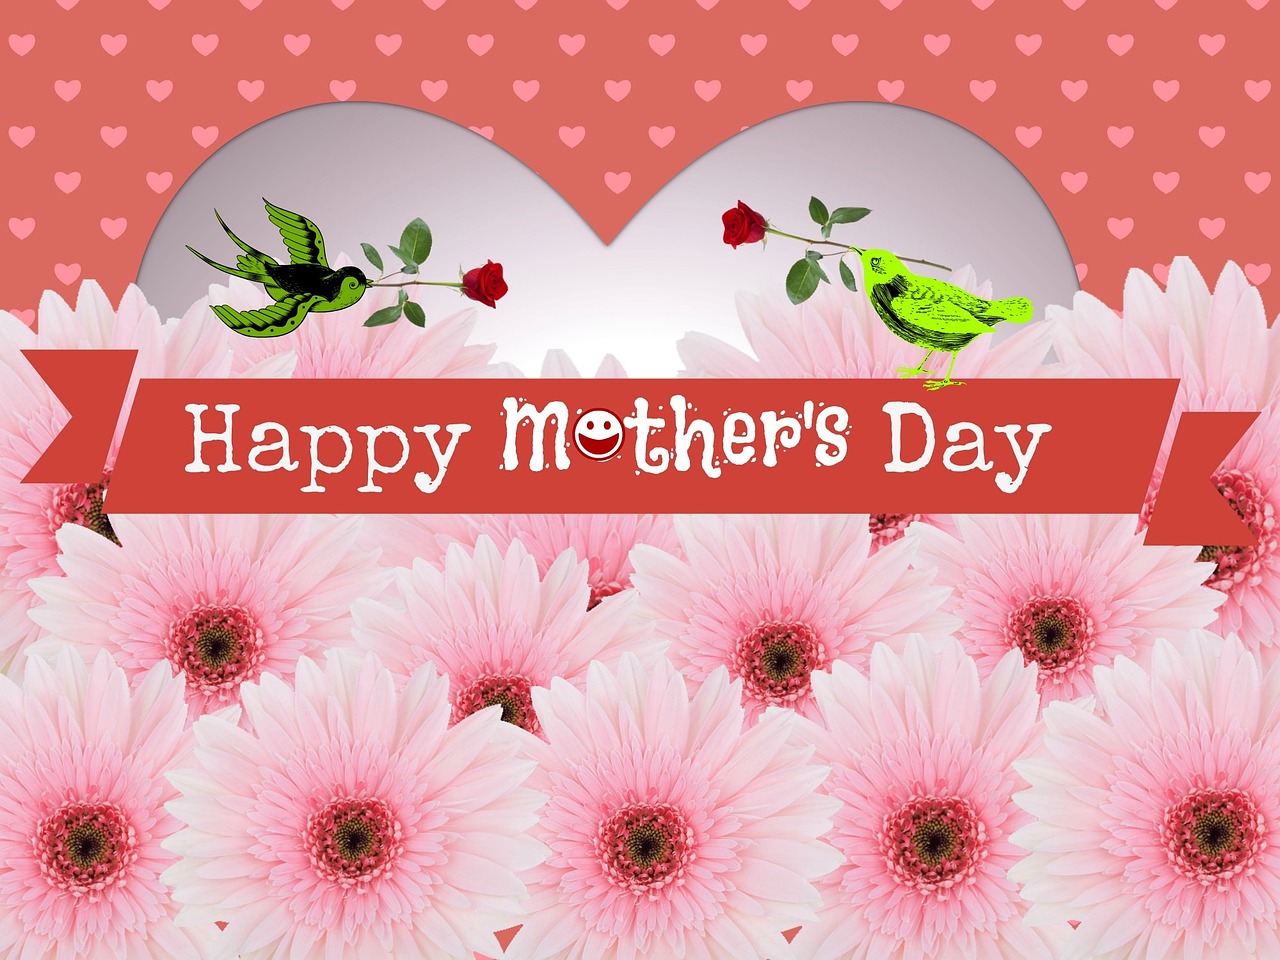 occasion mother's day celebration free photo